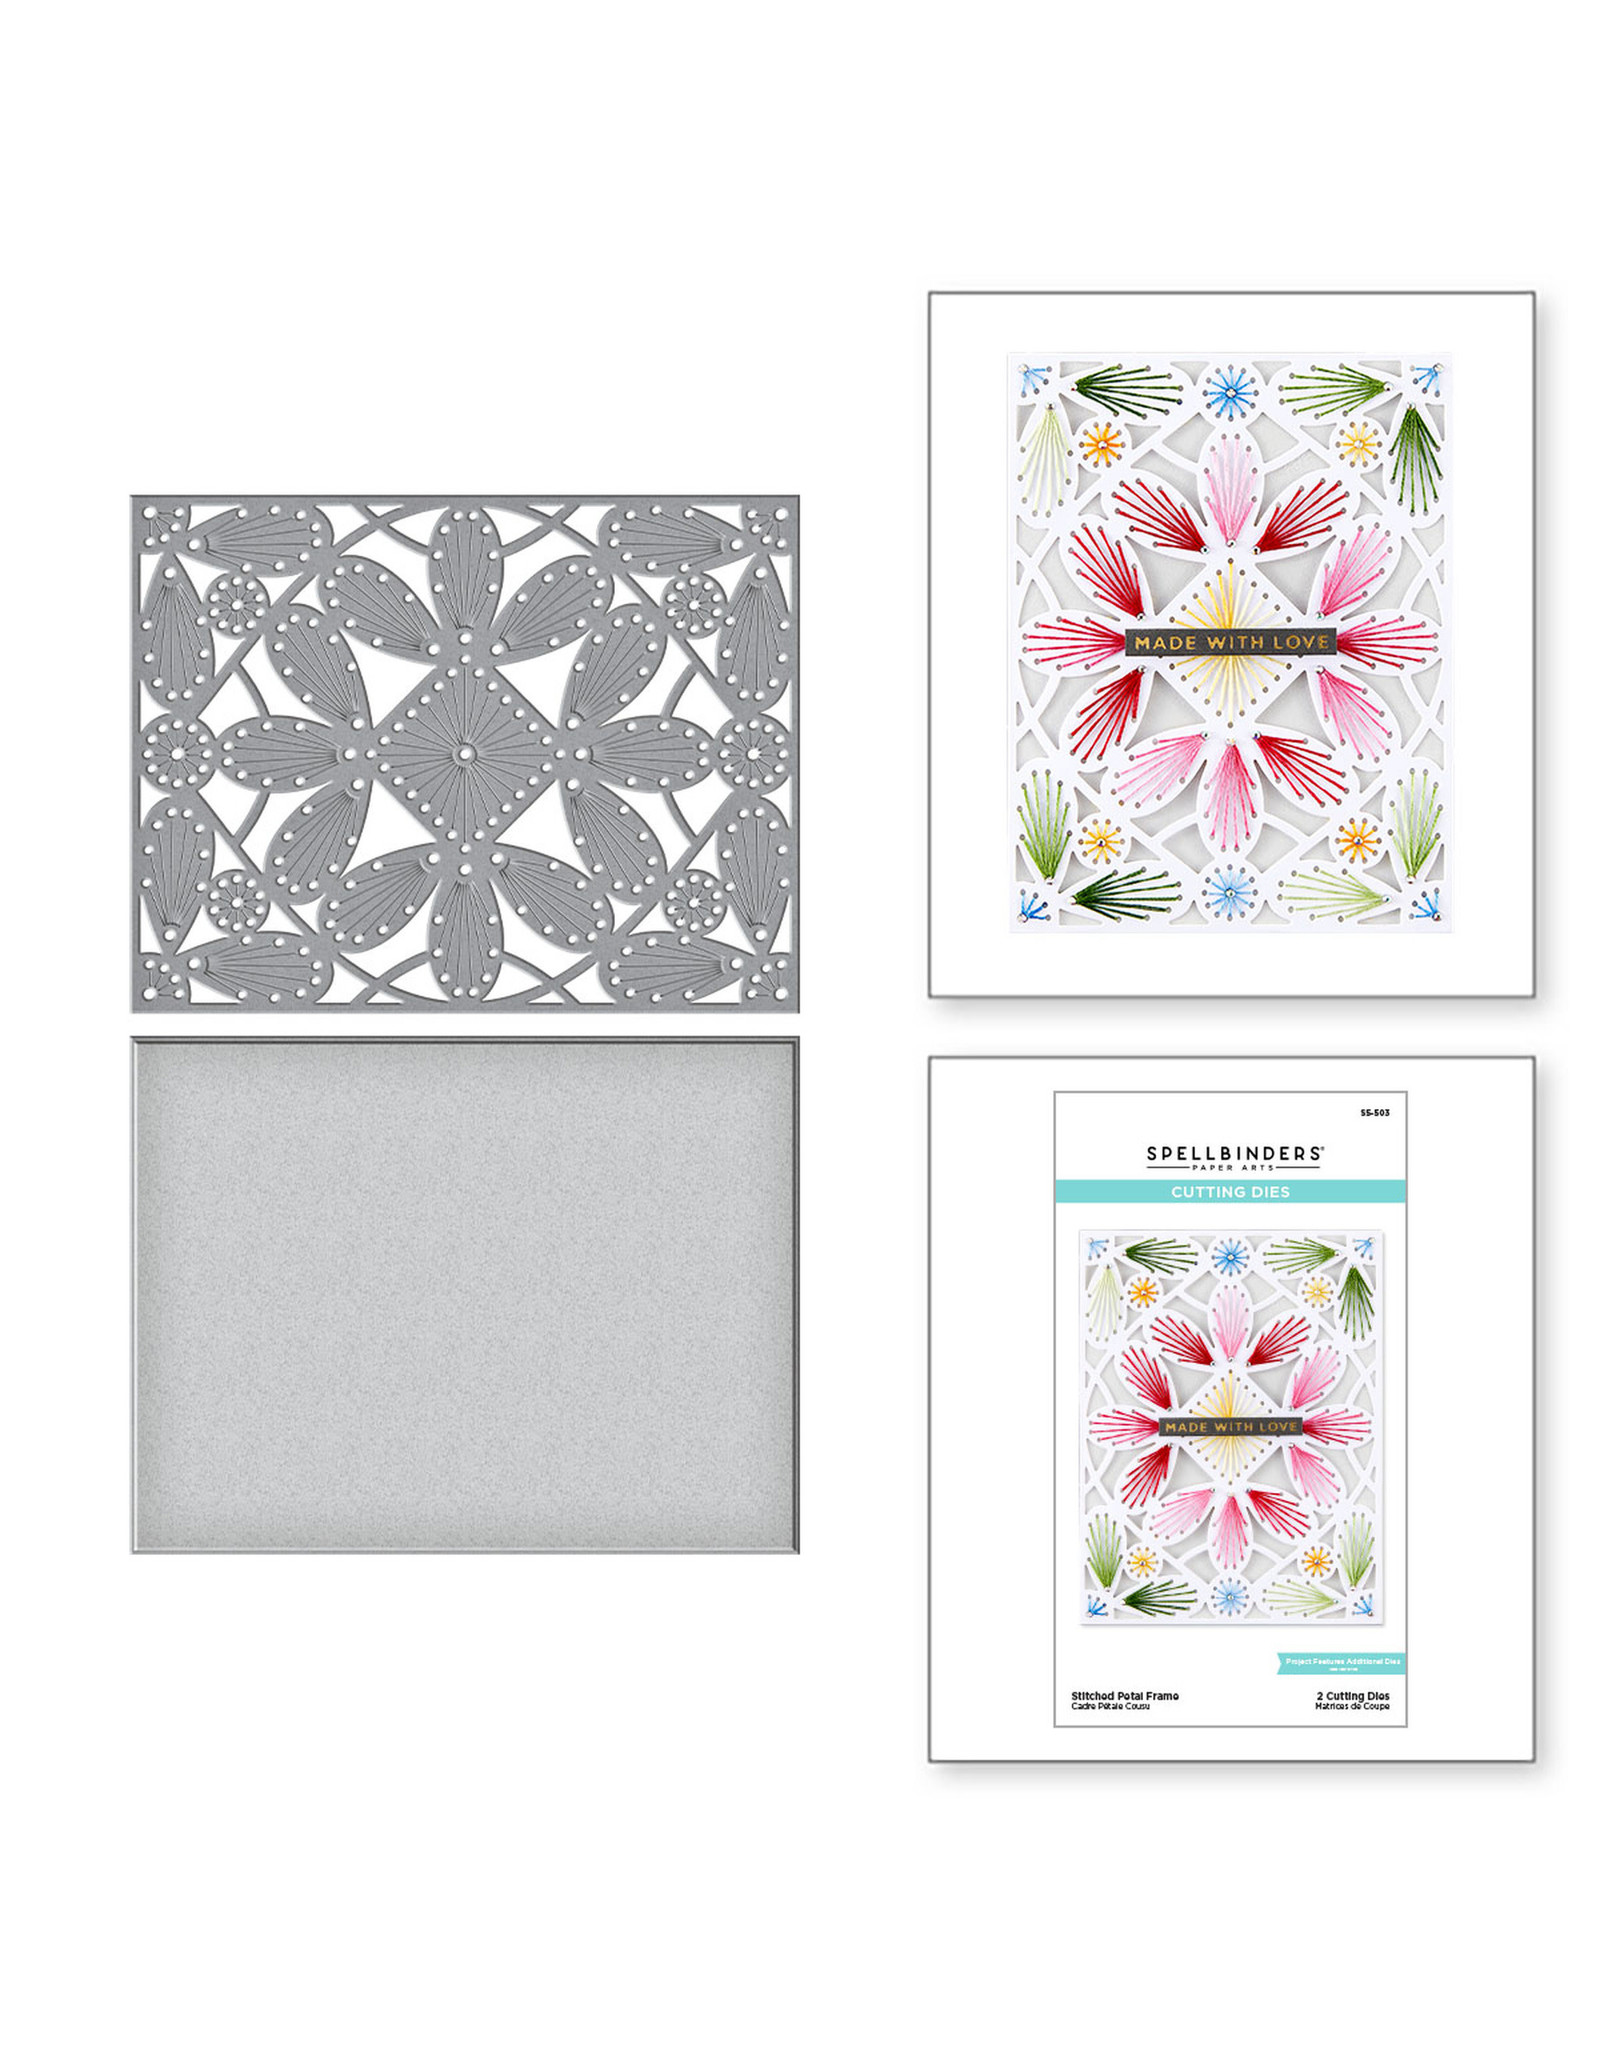 Spellbinders Stitched Petal Frame Etched Dies from the Spring Into Stitching Collection